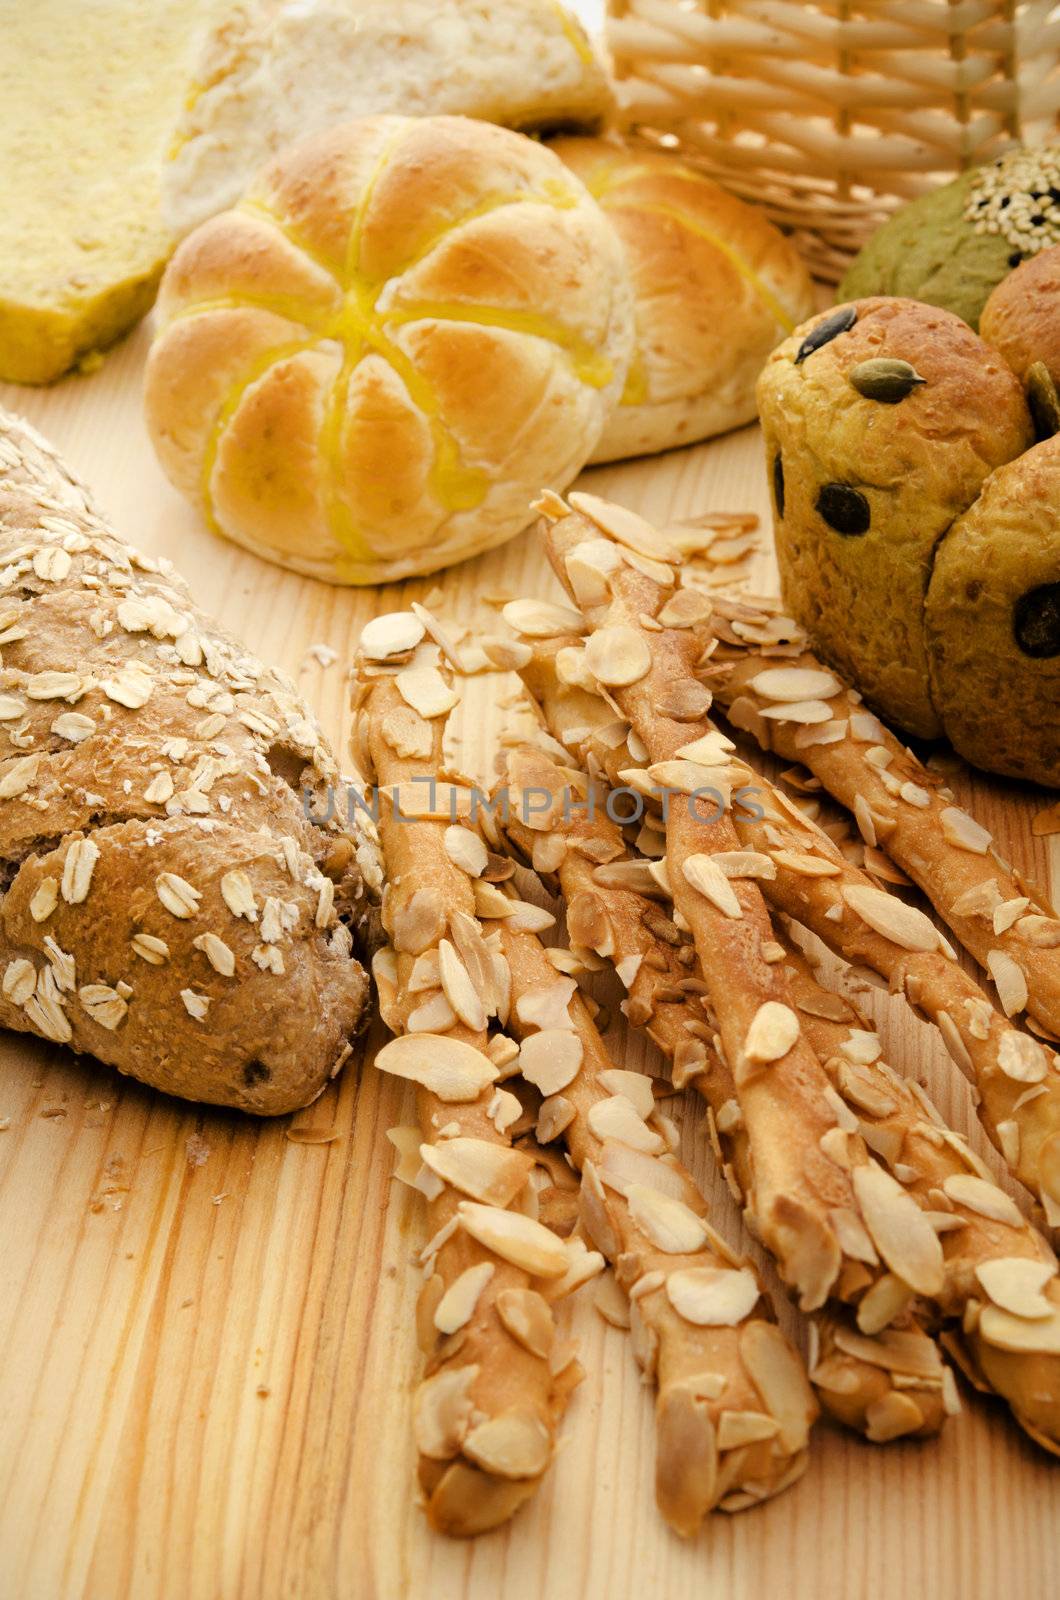 Variety of Organic Breads on plank background ,golden lights were used